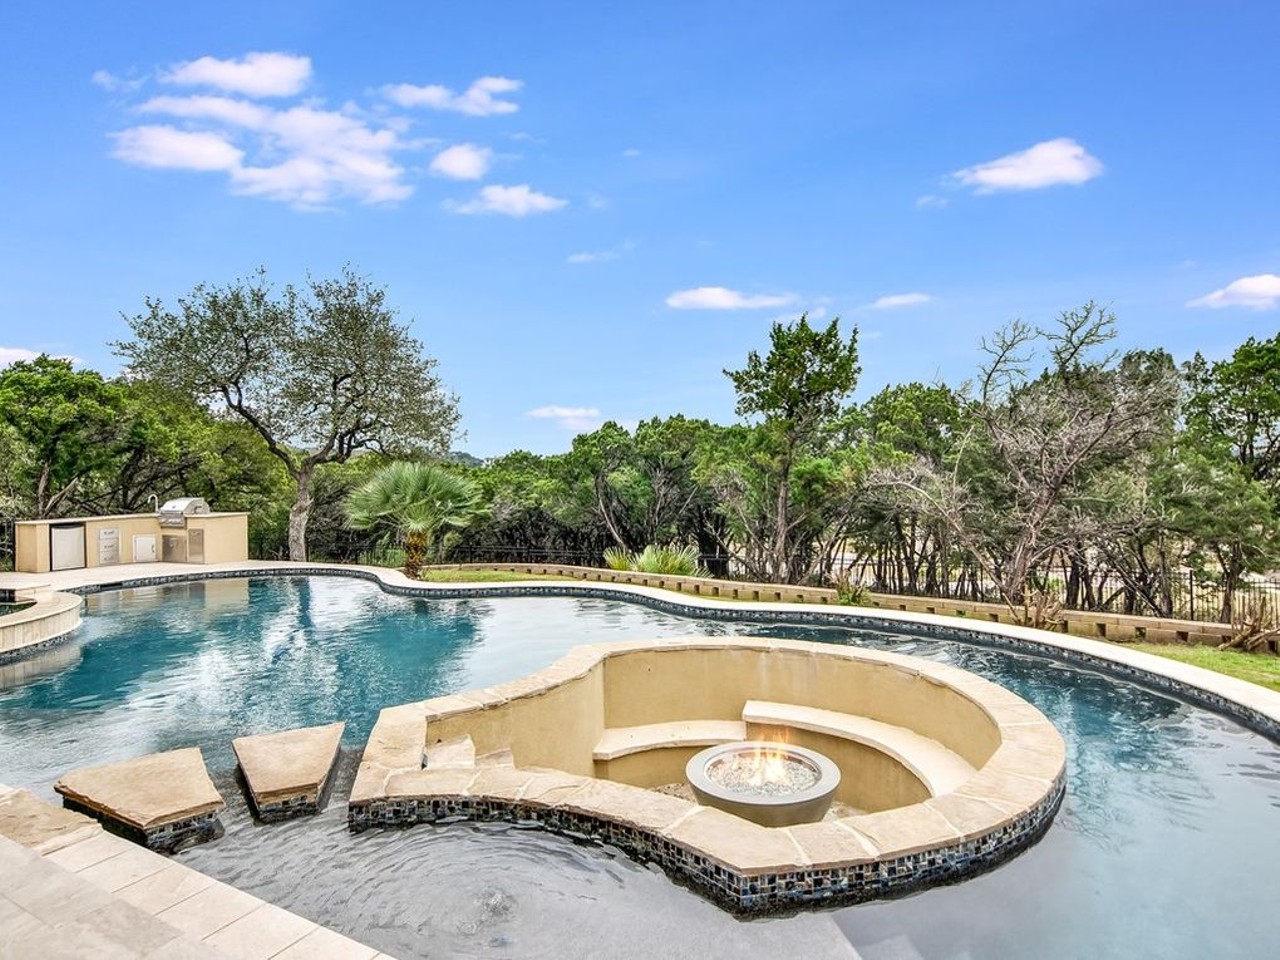 6118 Sierra Avila
$1,959,900
Fire by the pool? 
A backyard firepit is great, but this house takes it to the next level — by putting it inside the pool.